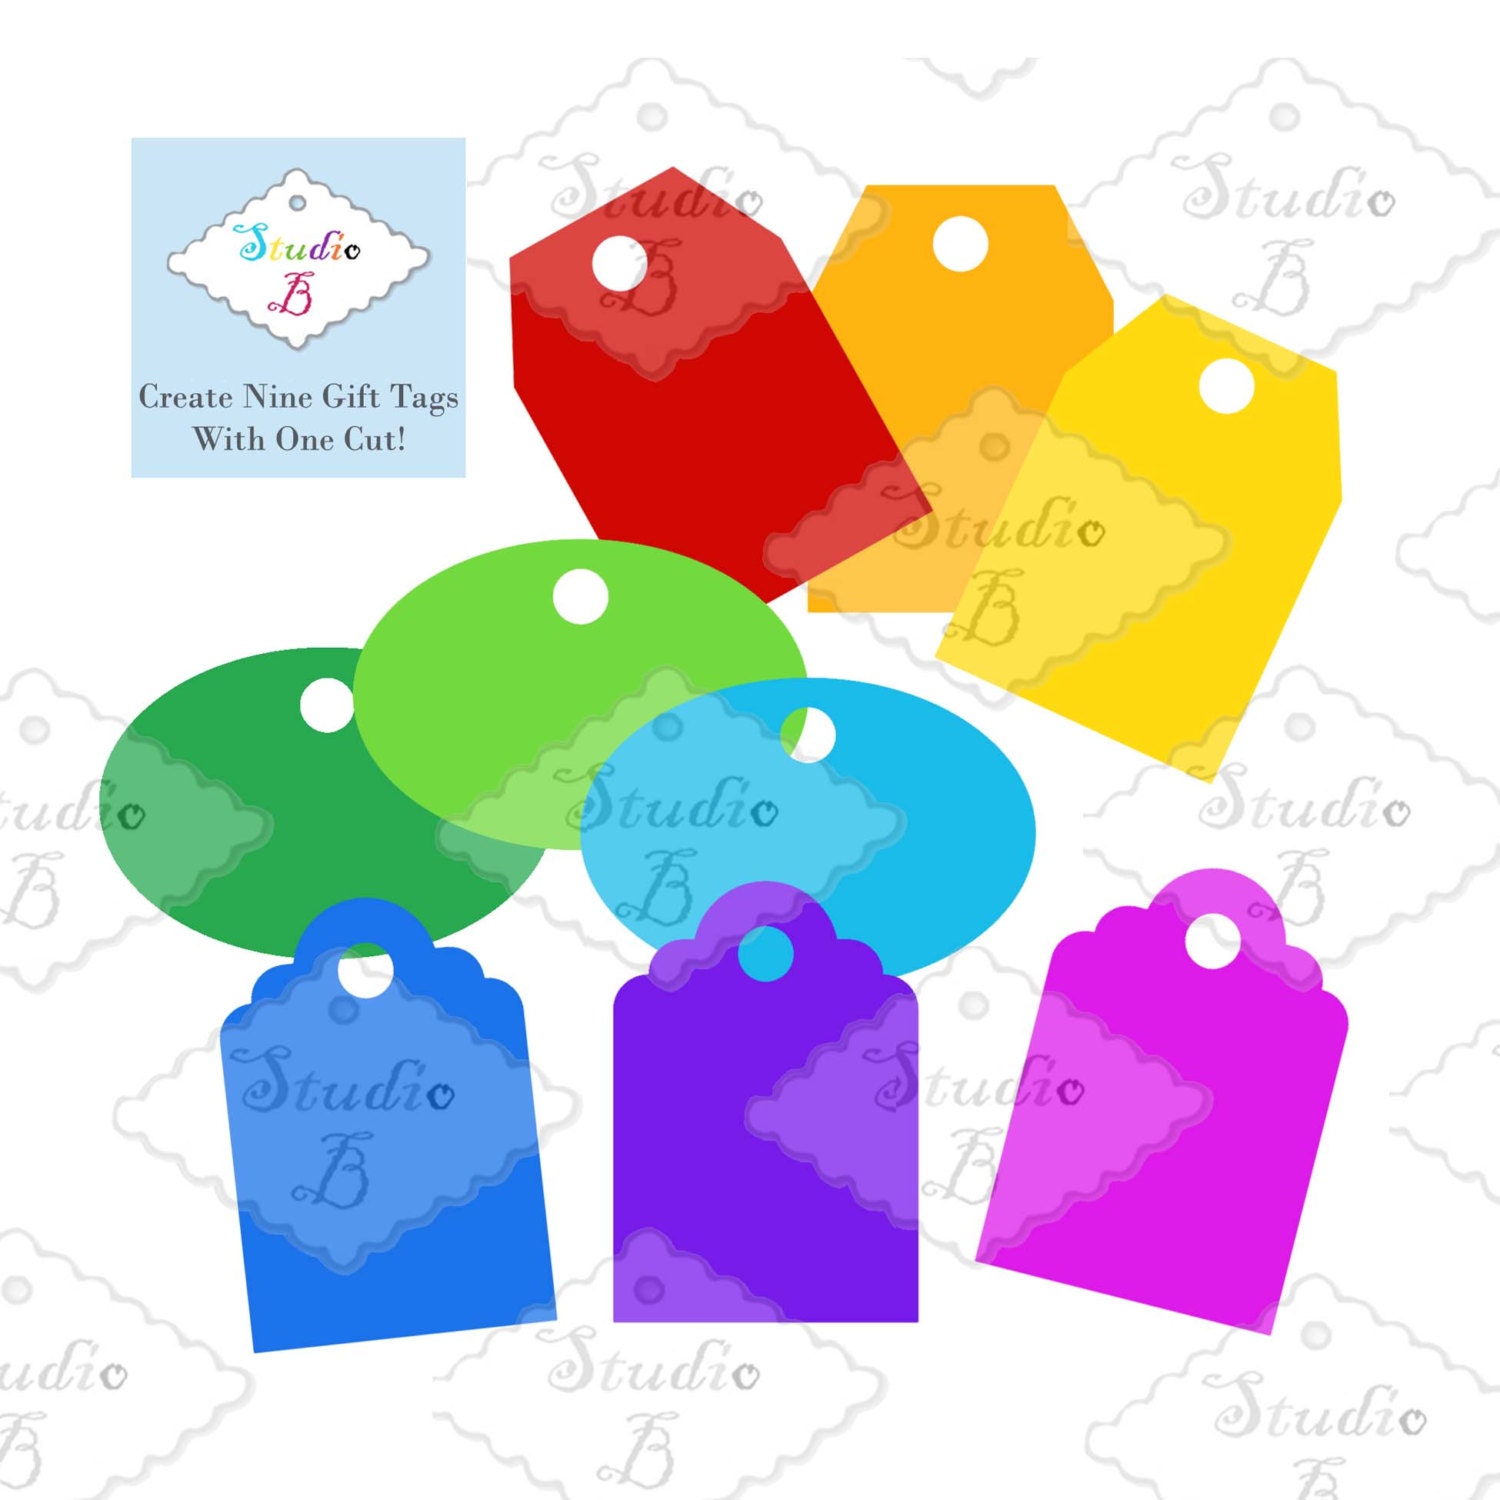 Download Gift Tag Template Set of 9 SVG Cutting Files